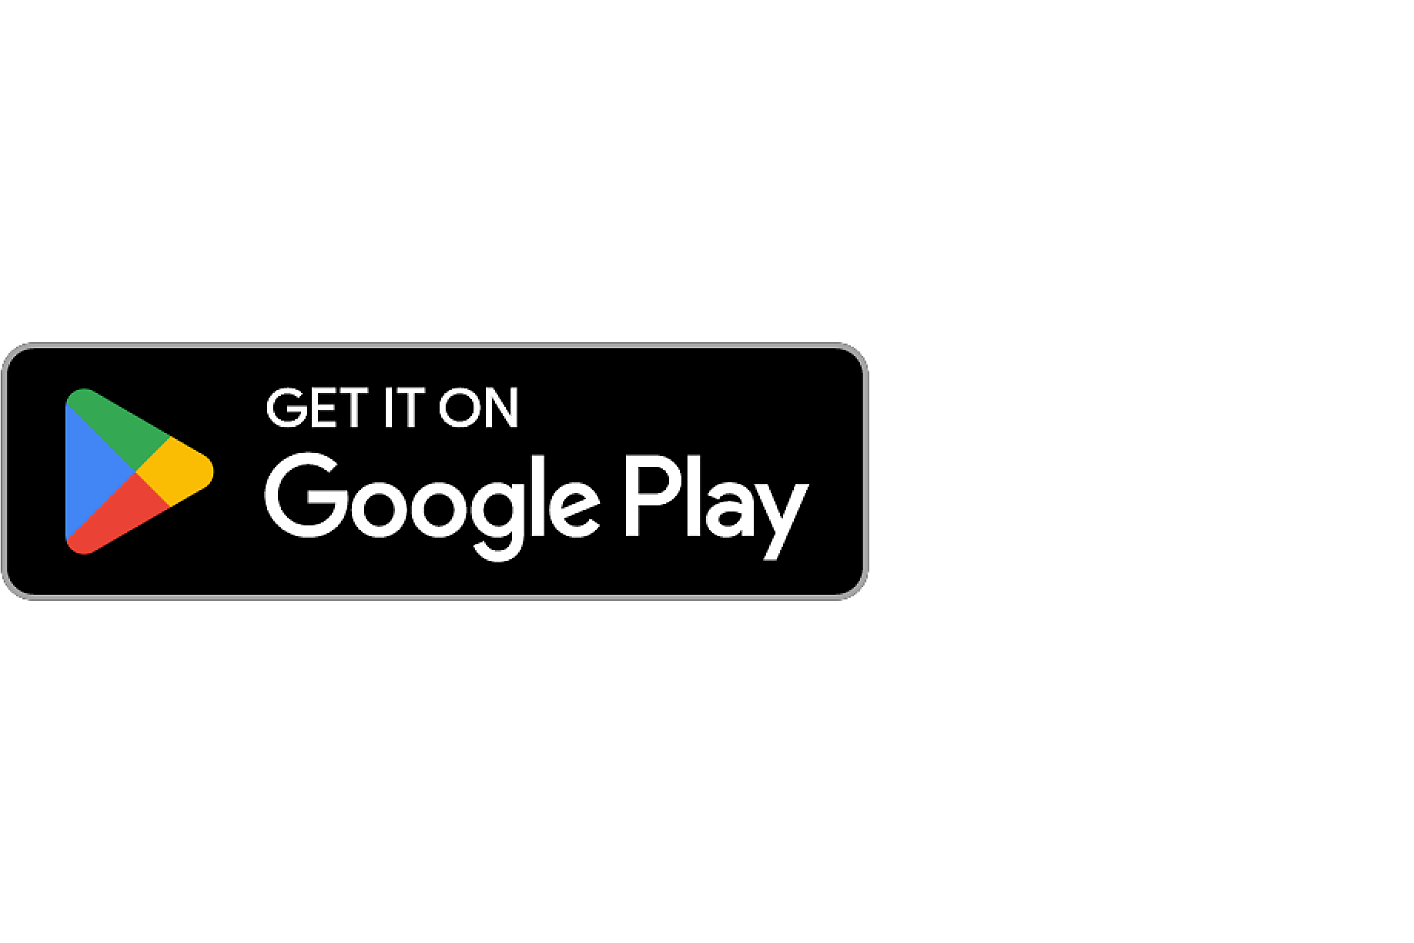 Image of the Google Play store logo with the text "GET IT ON" above